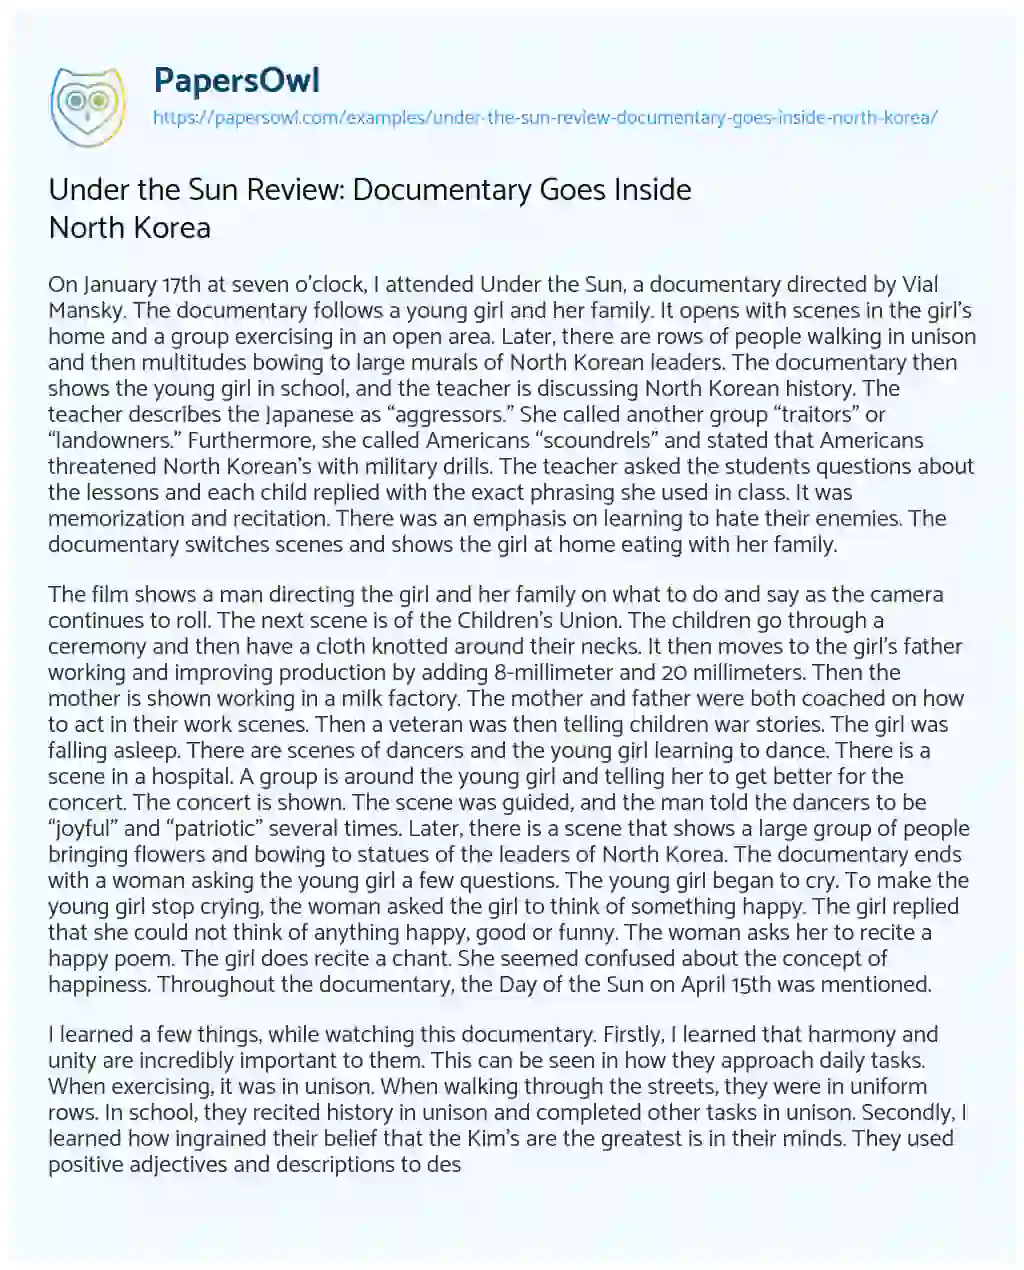 Essay on Under the Sun Review: Documentary Goes Inside North Korea